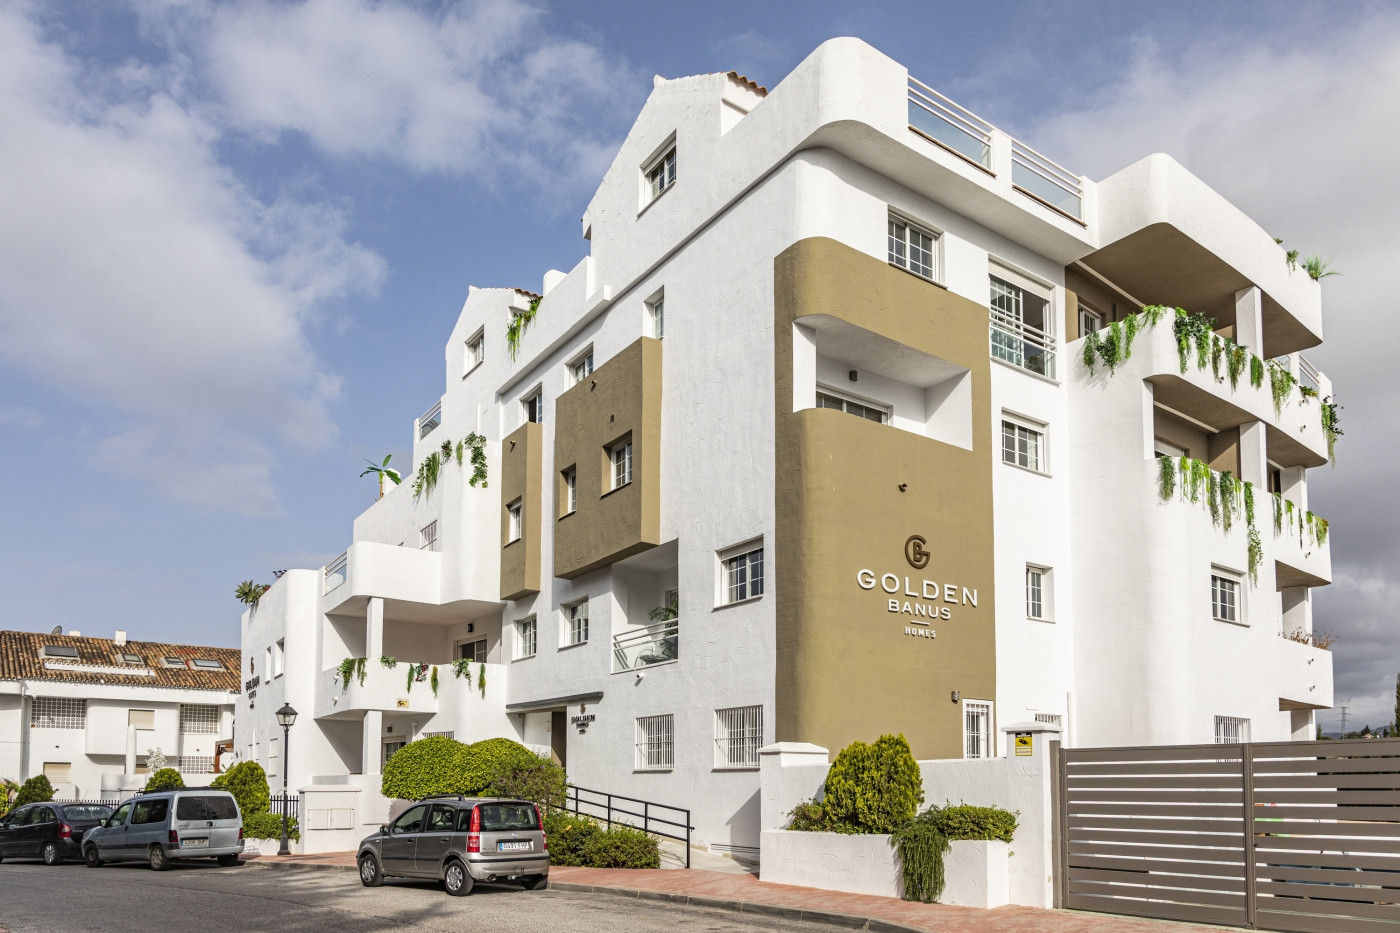 Golden Banús Homes: Apartments ready to move in the most desirable location in the Costa del Sol.